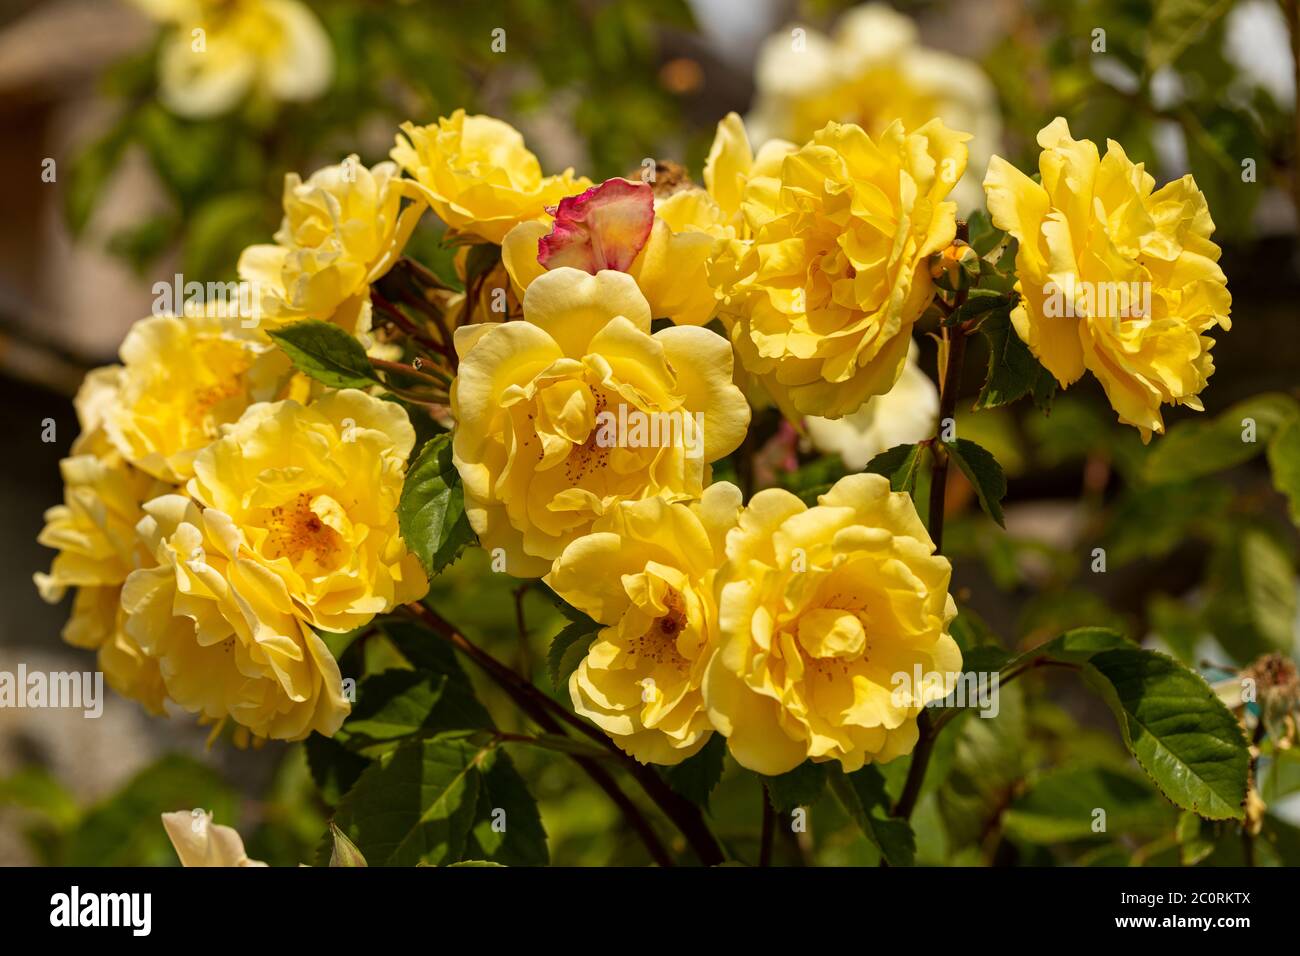 Close up of a David Austin yellow rose called Rosa Golden Gate. An English climbing rose.  Flowering in a garden in England, UK Stock Photo